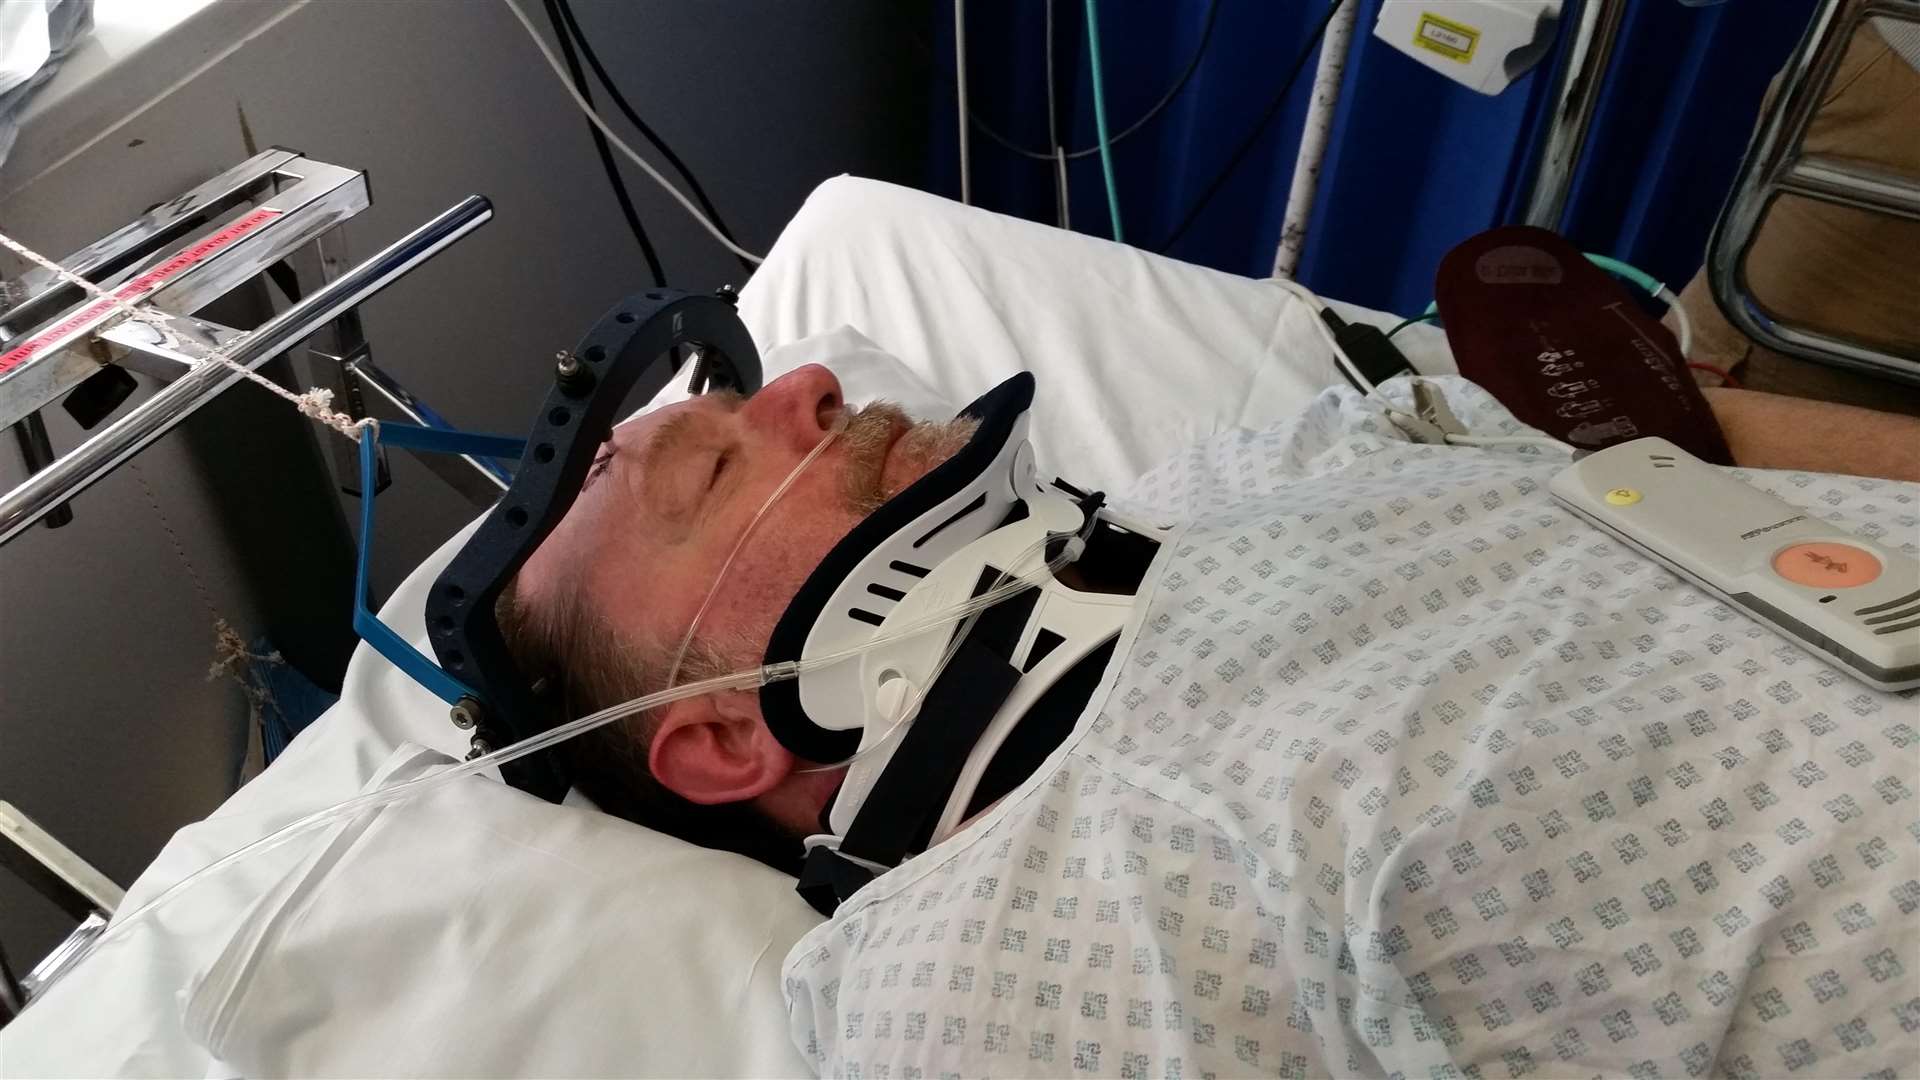 Doug Caddell in hospital following the level crossing accident